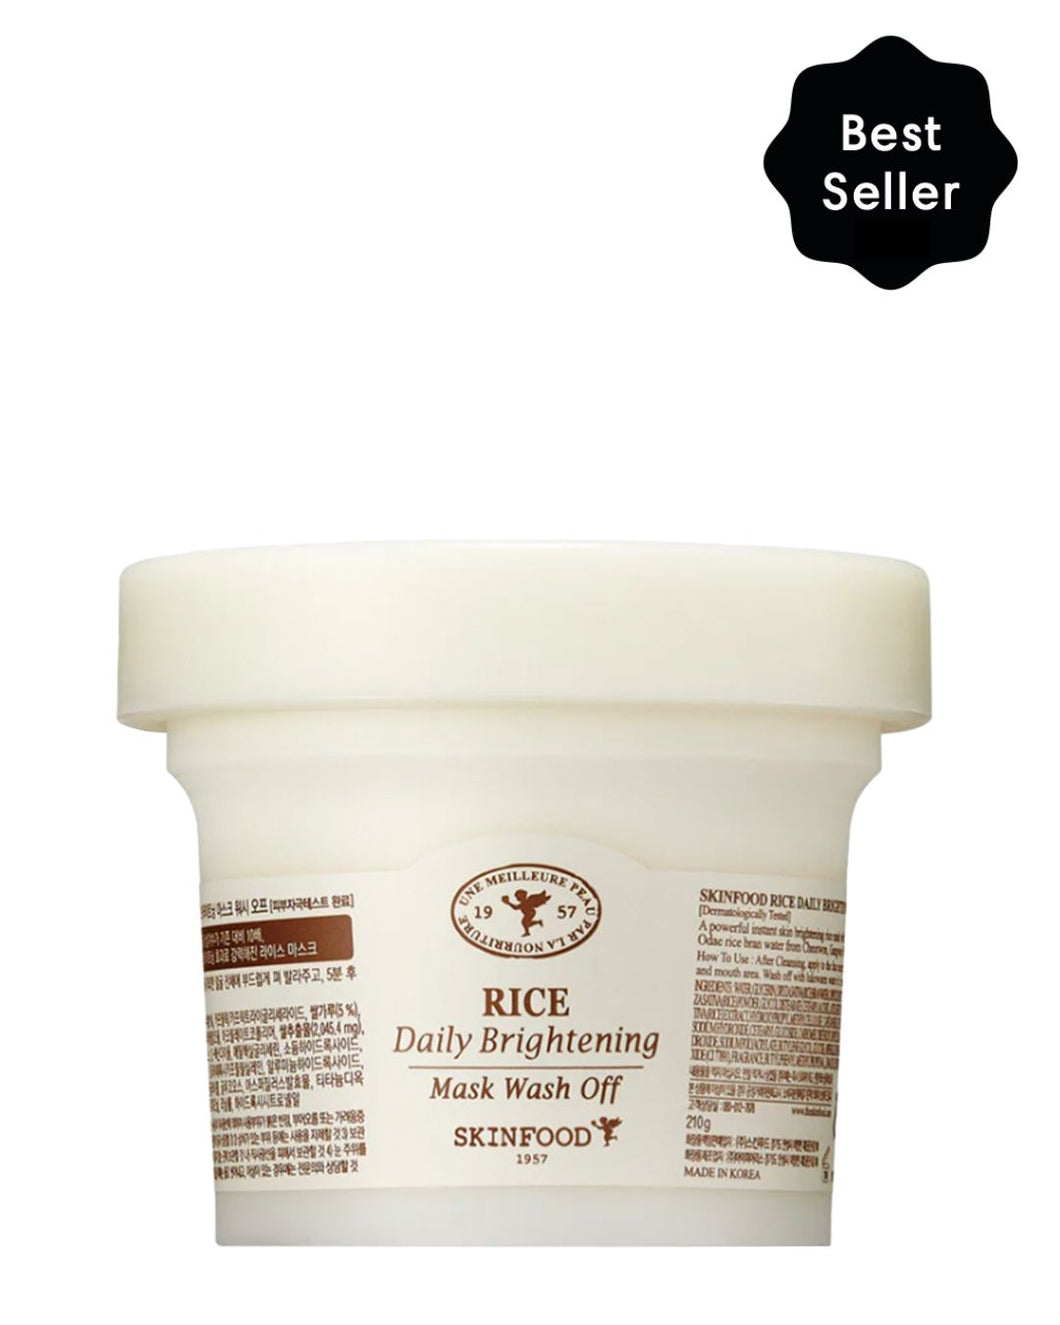 Rice Daily Brightening  mask wash off 210gr - SKINFOOD